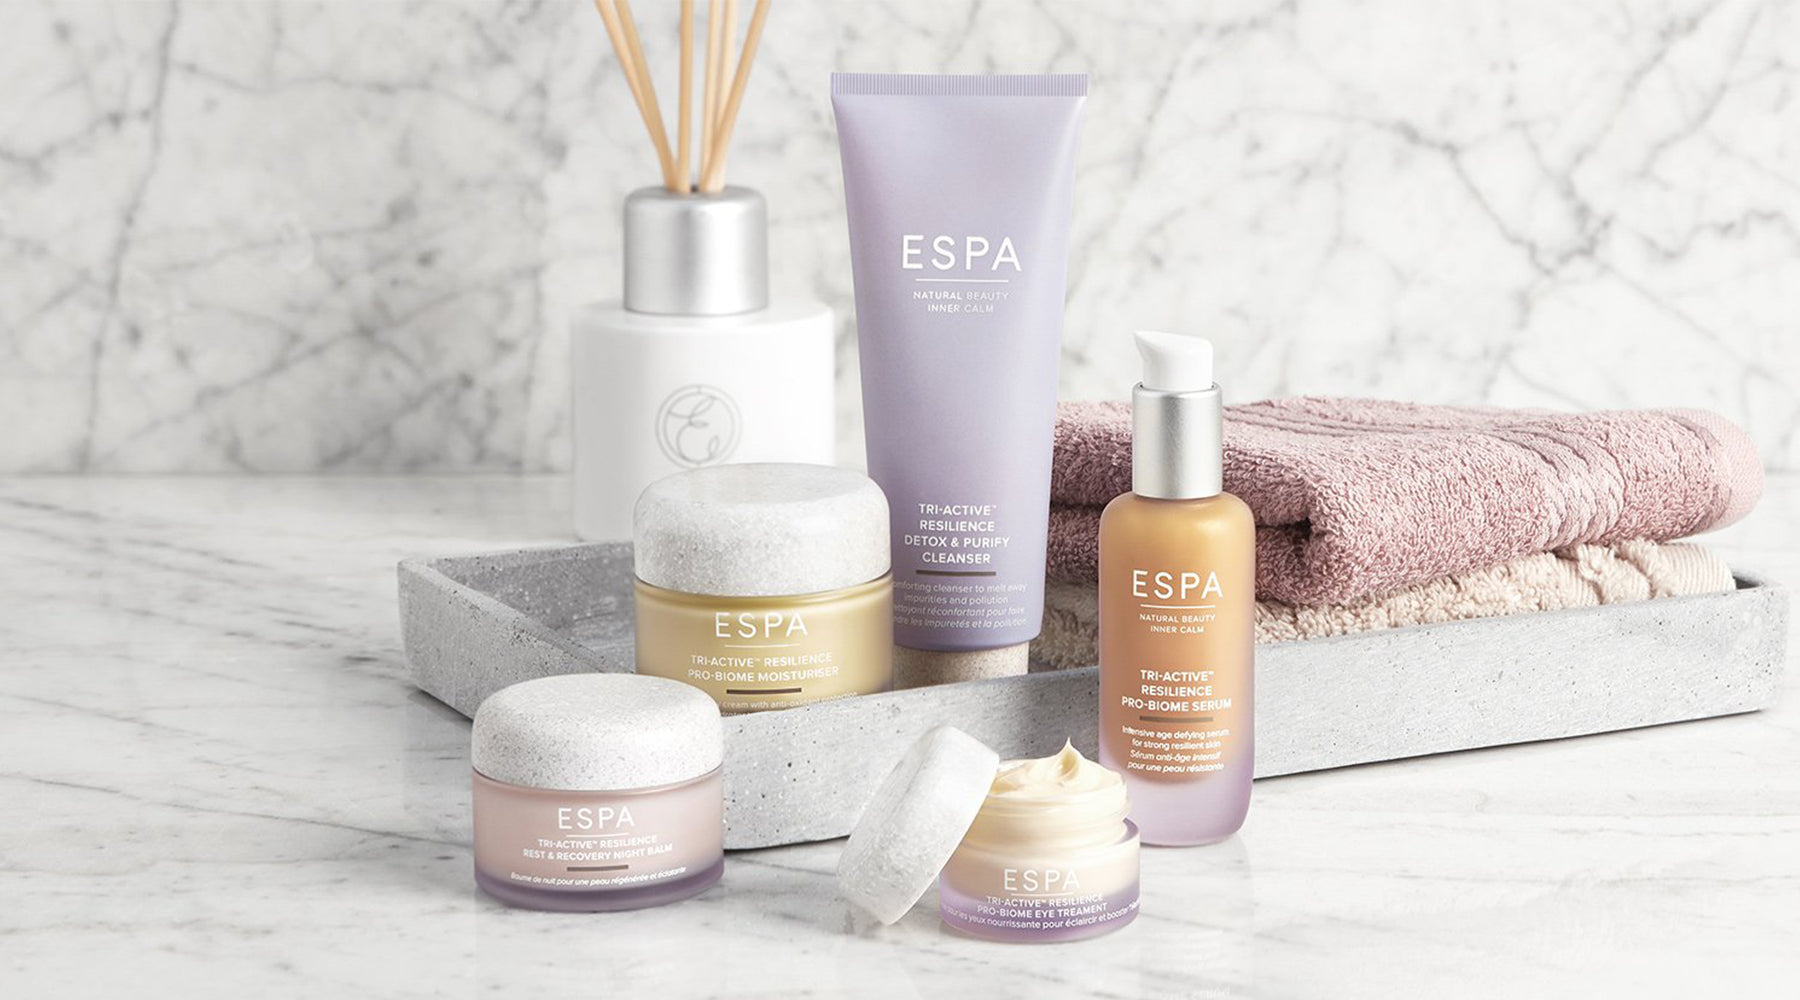 Launch Special: ESPA's Age-Defying Resilience